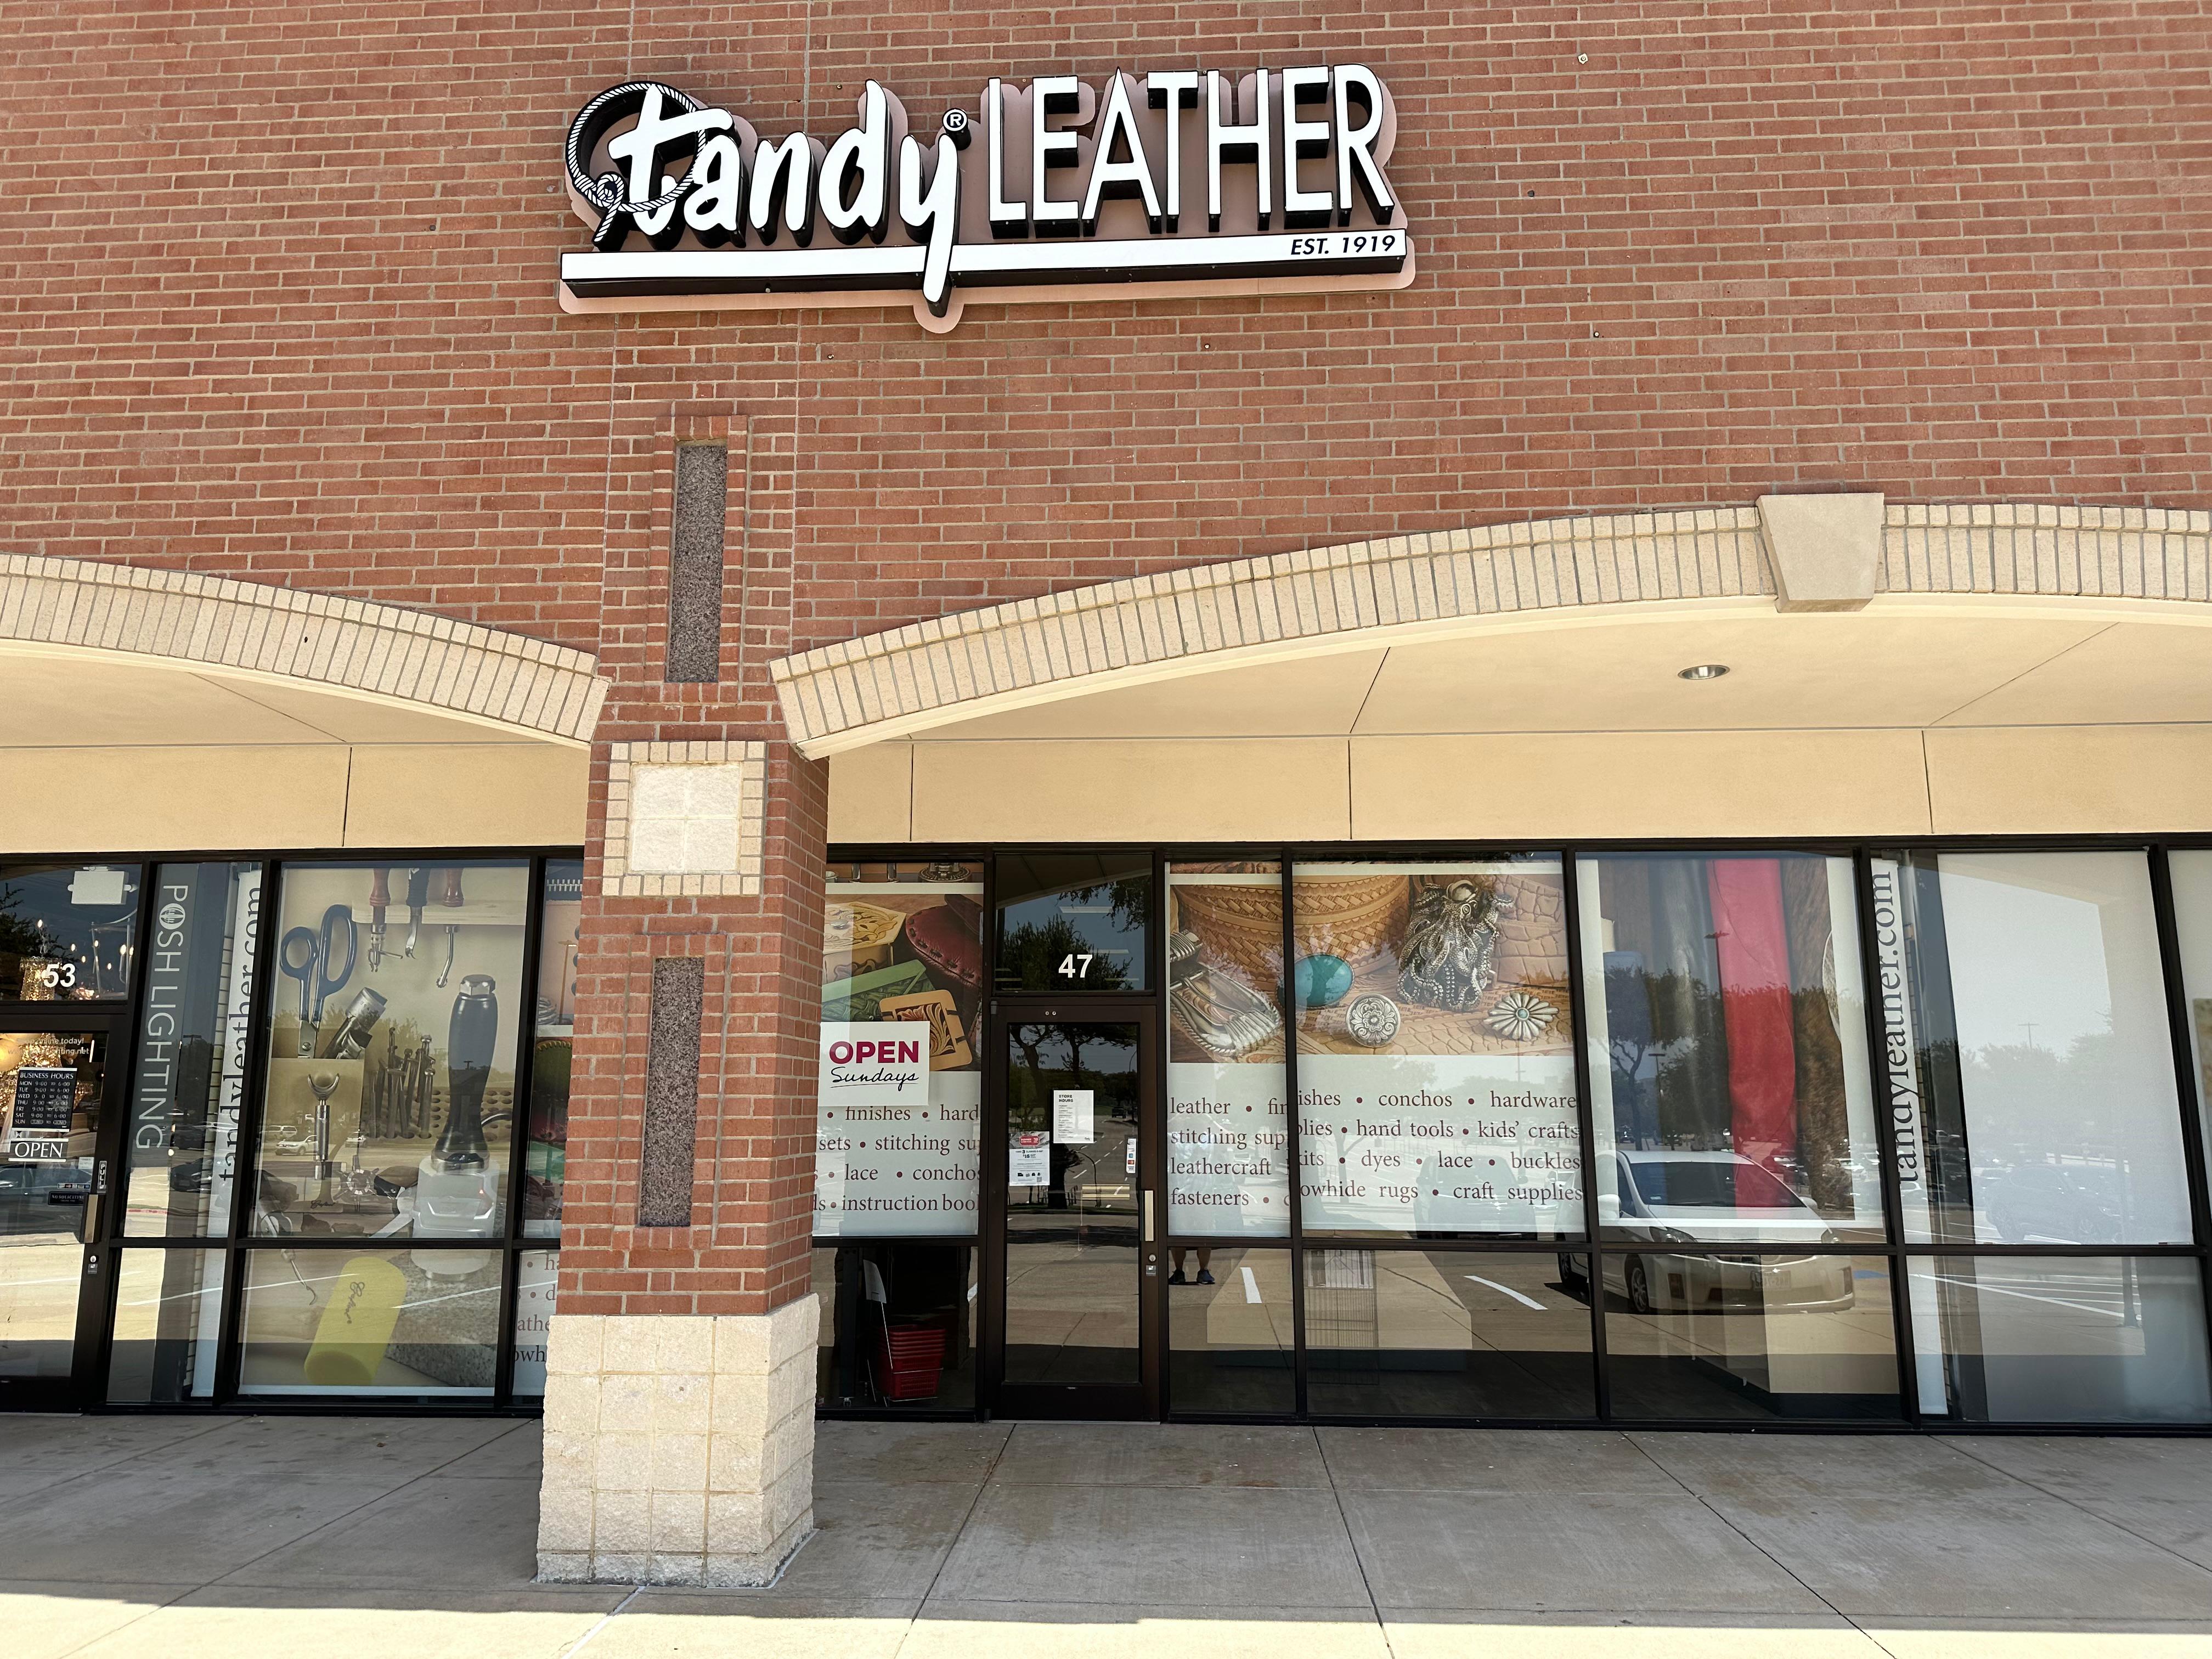 Memphis Store #114 — Tandy Leather, Inc.